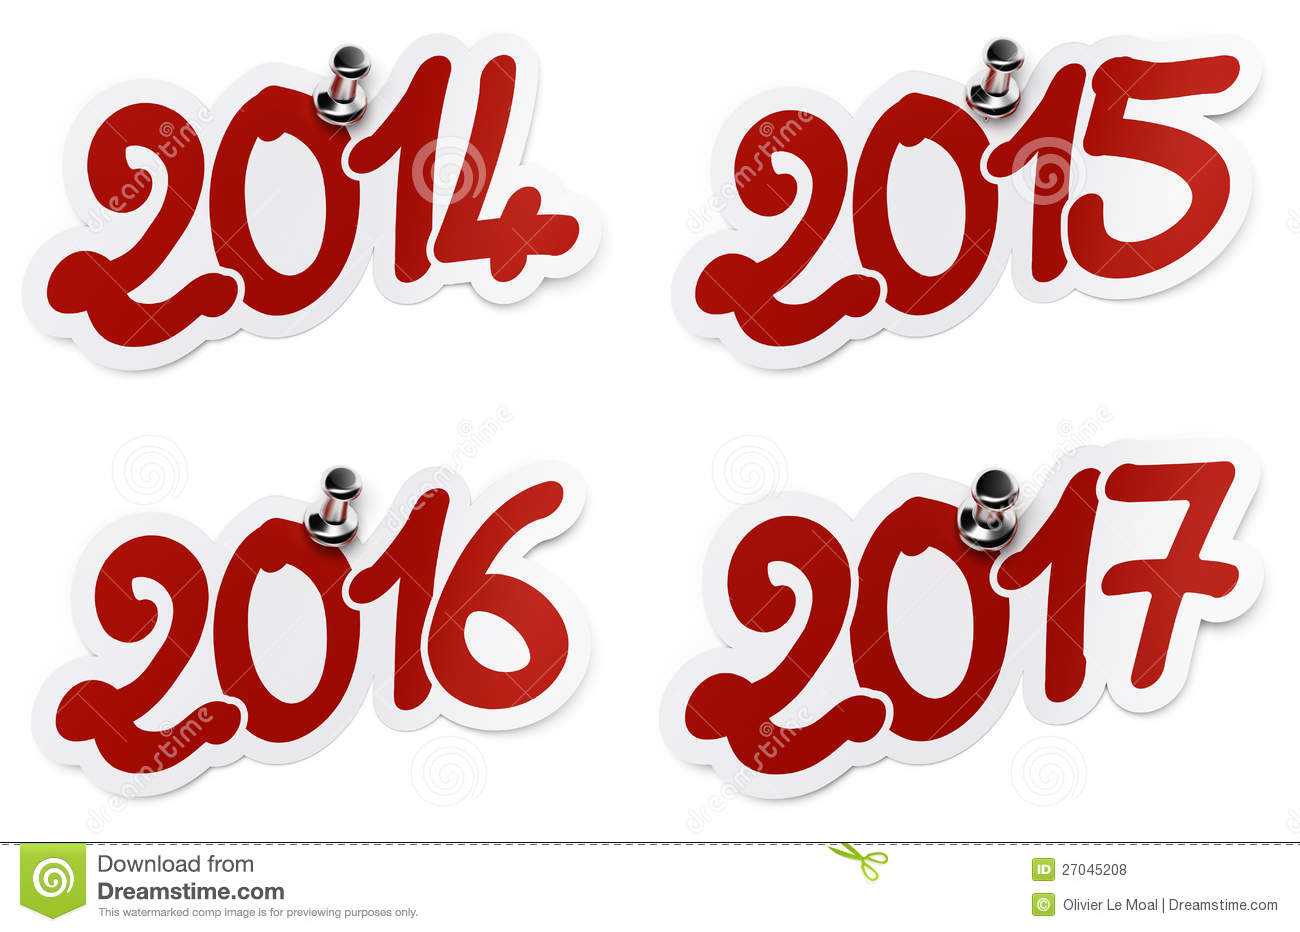 2014 2015 2016 2017 Year Stickers Royalty Free Stock Photos   Image